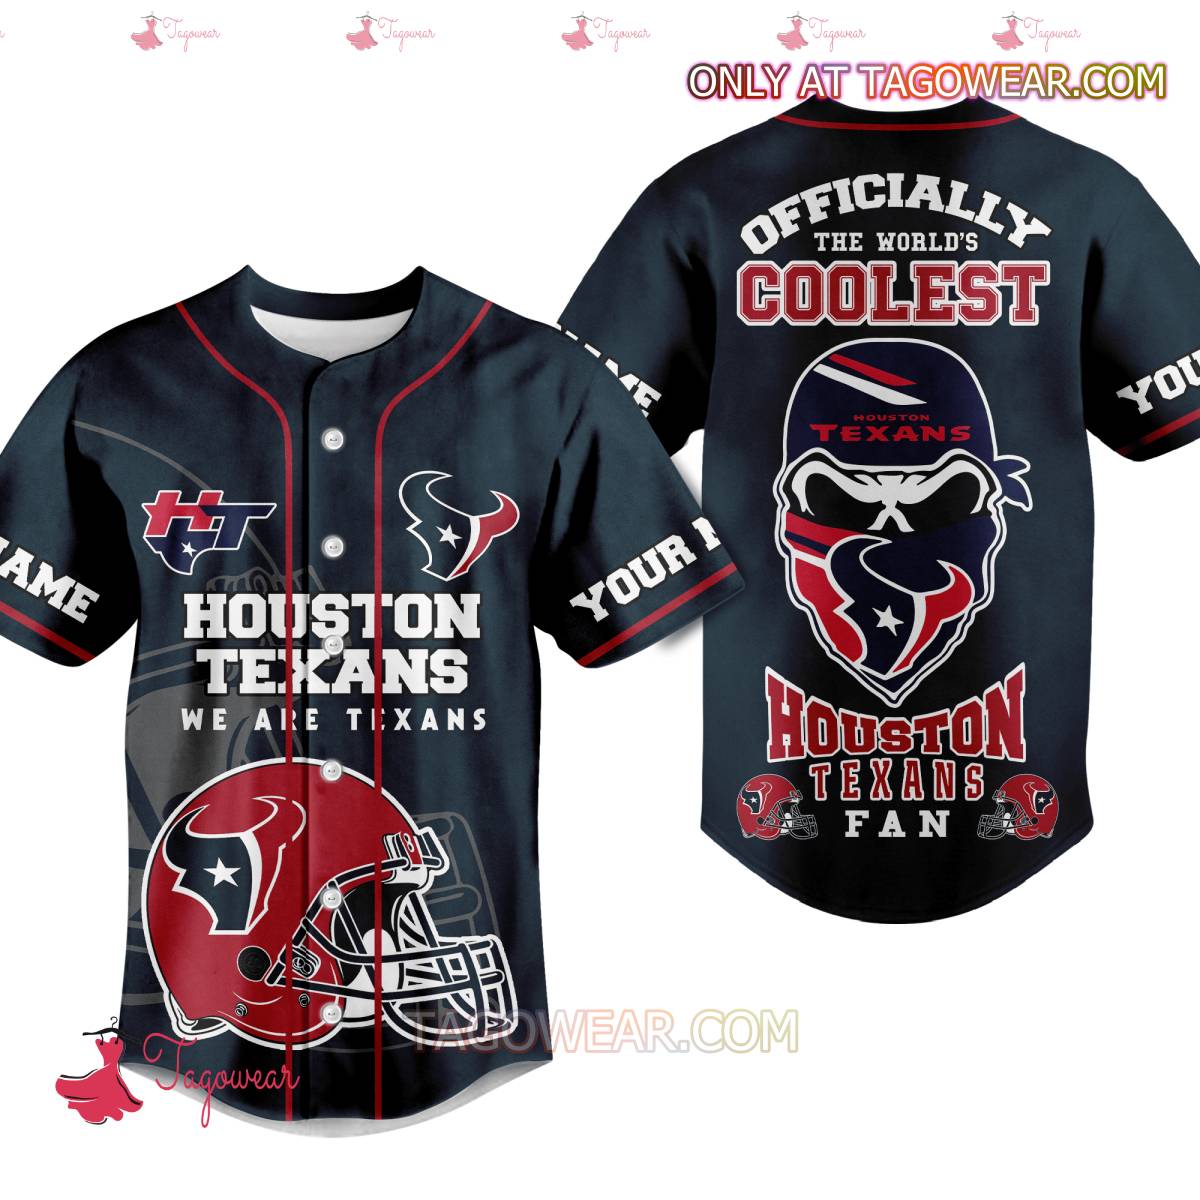 Houston Texans Officially The World's Coolest Personalized Baseball Jersey